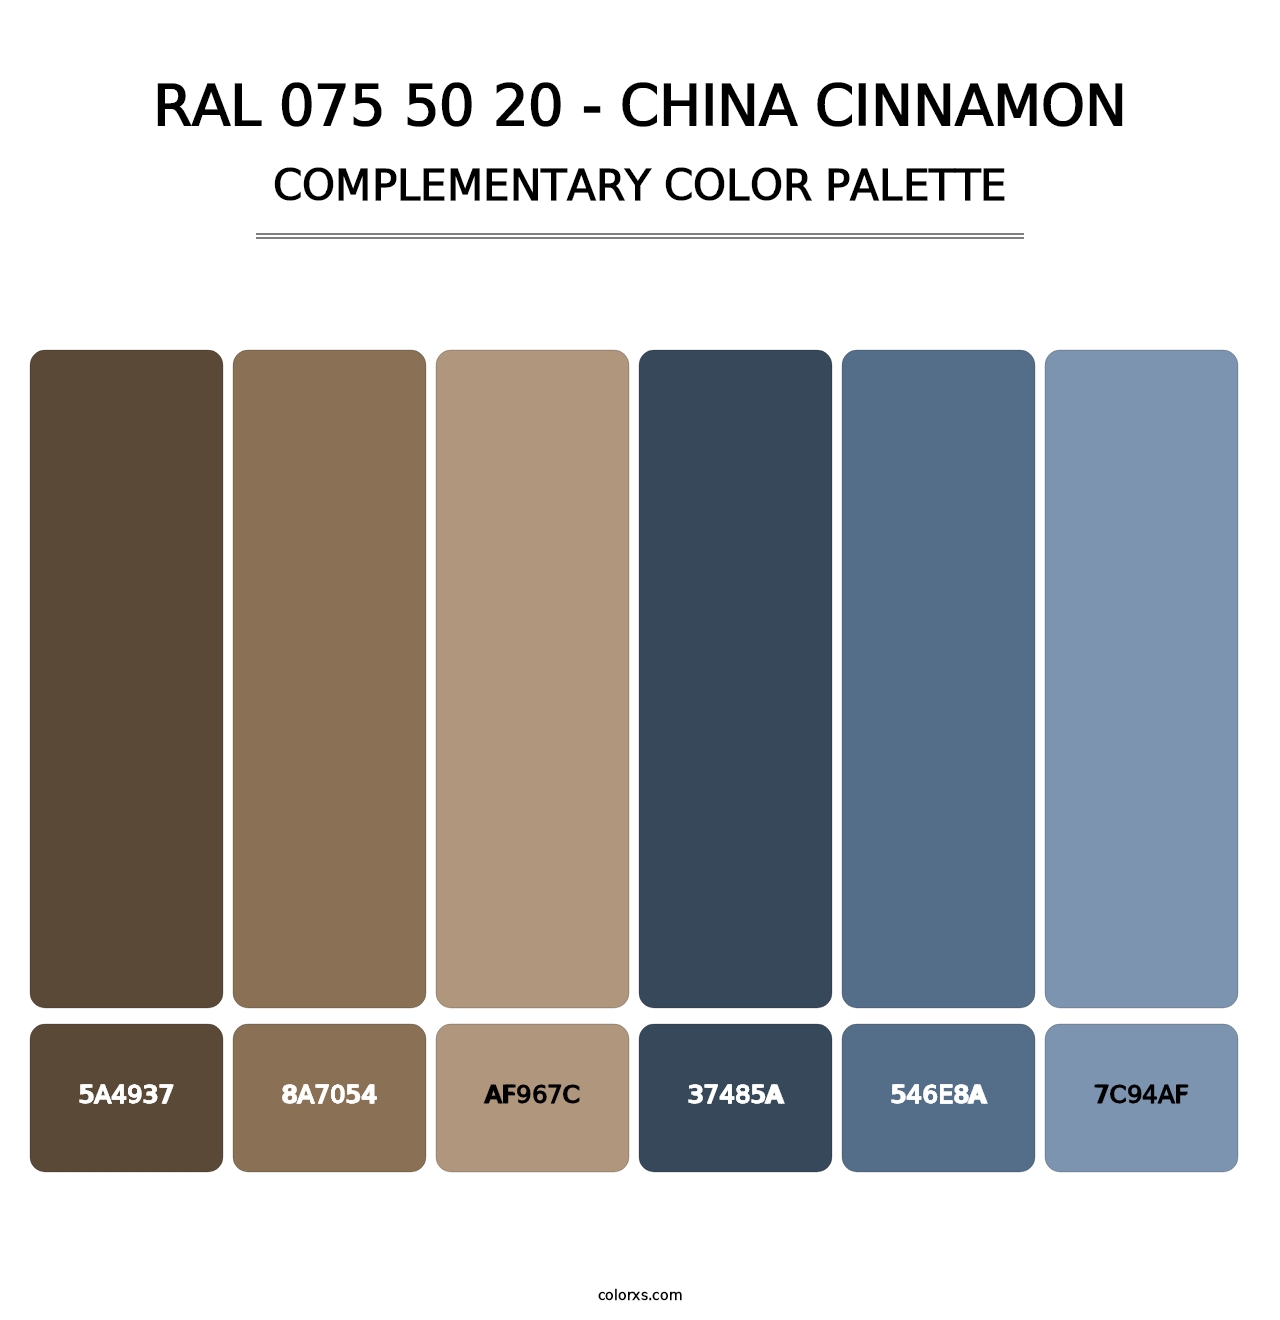 RAL 075 50 20 - China Cinnamon - Complementary Color Palette